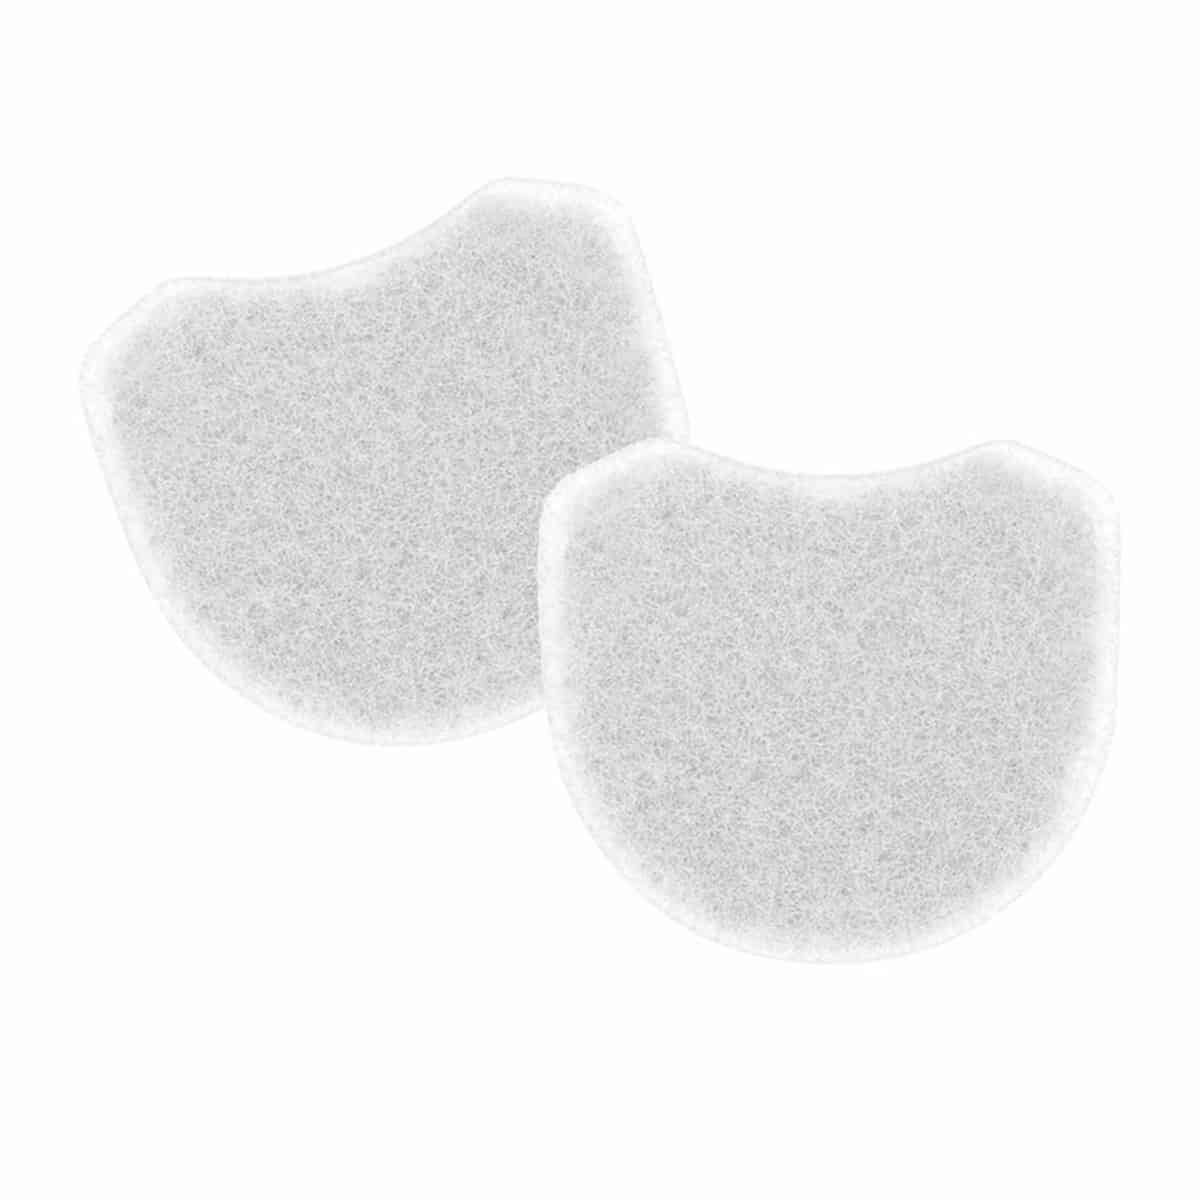 Featured image for “ResMed AirMini Filter (2 pack)”